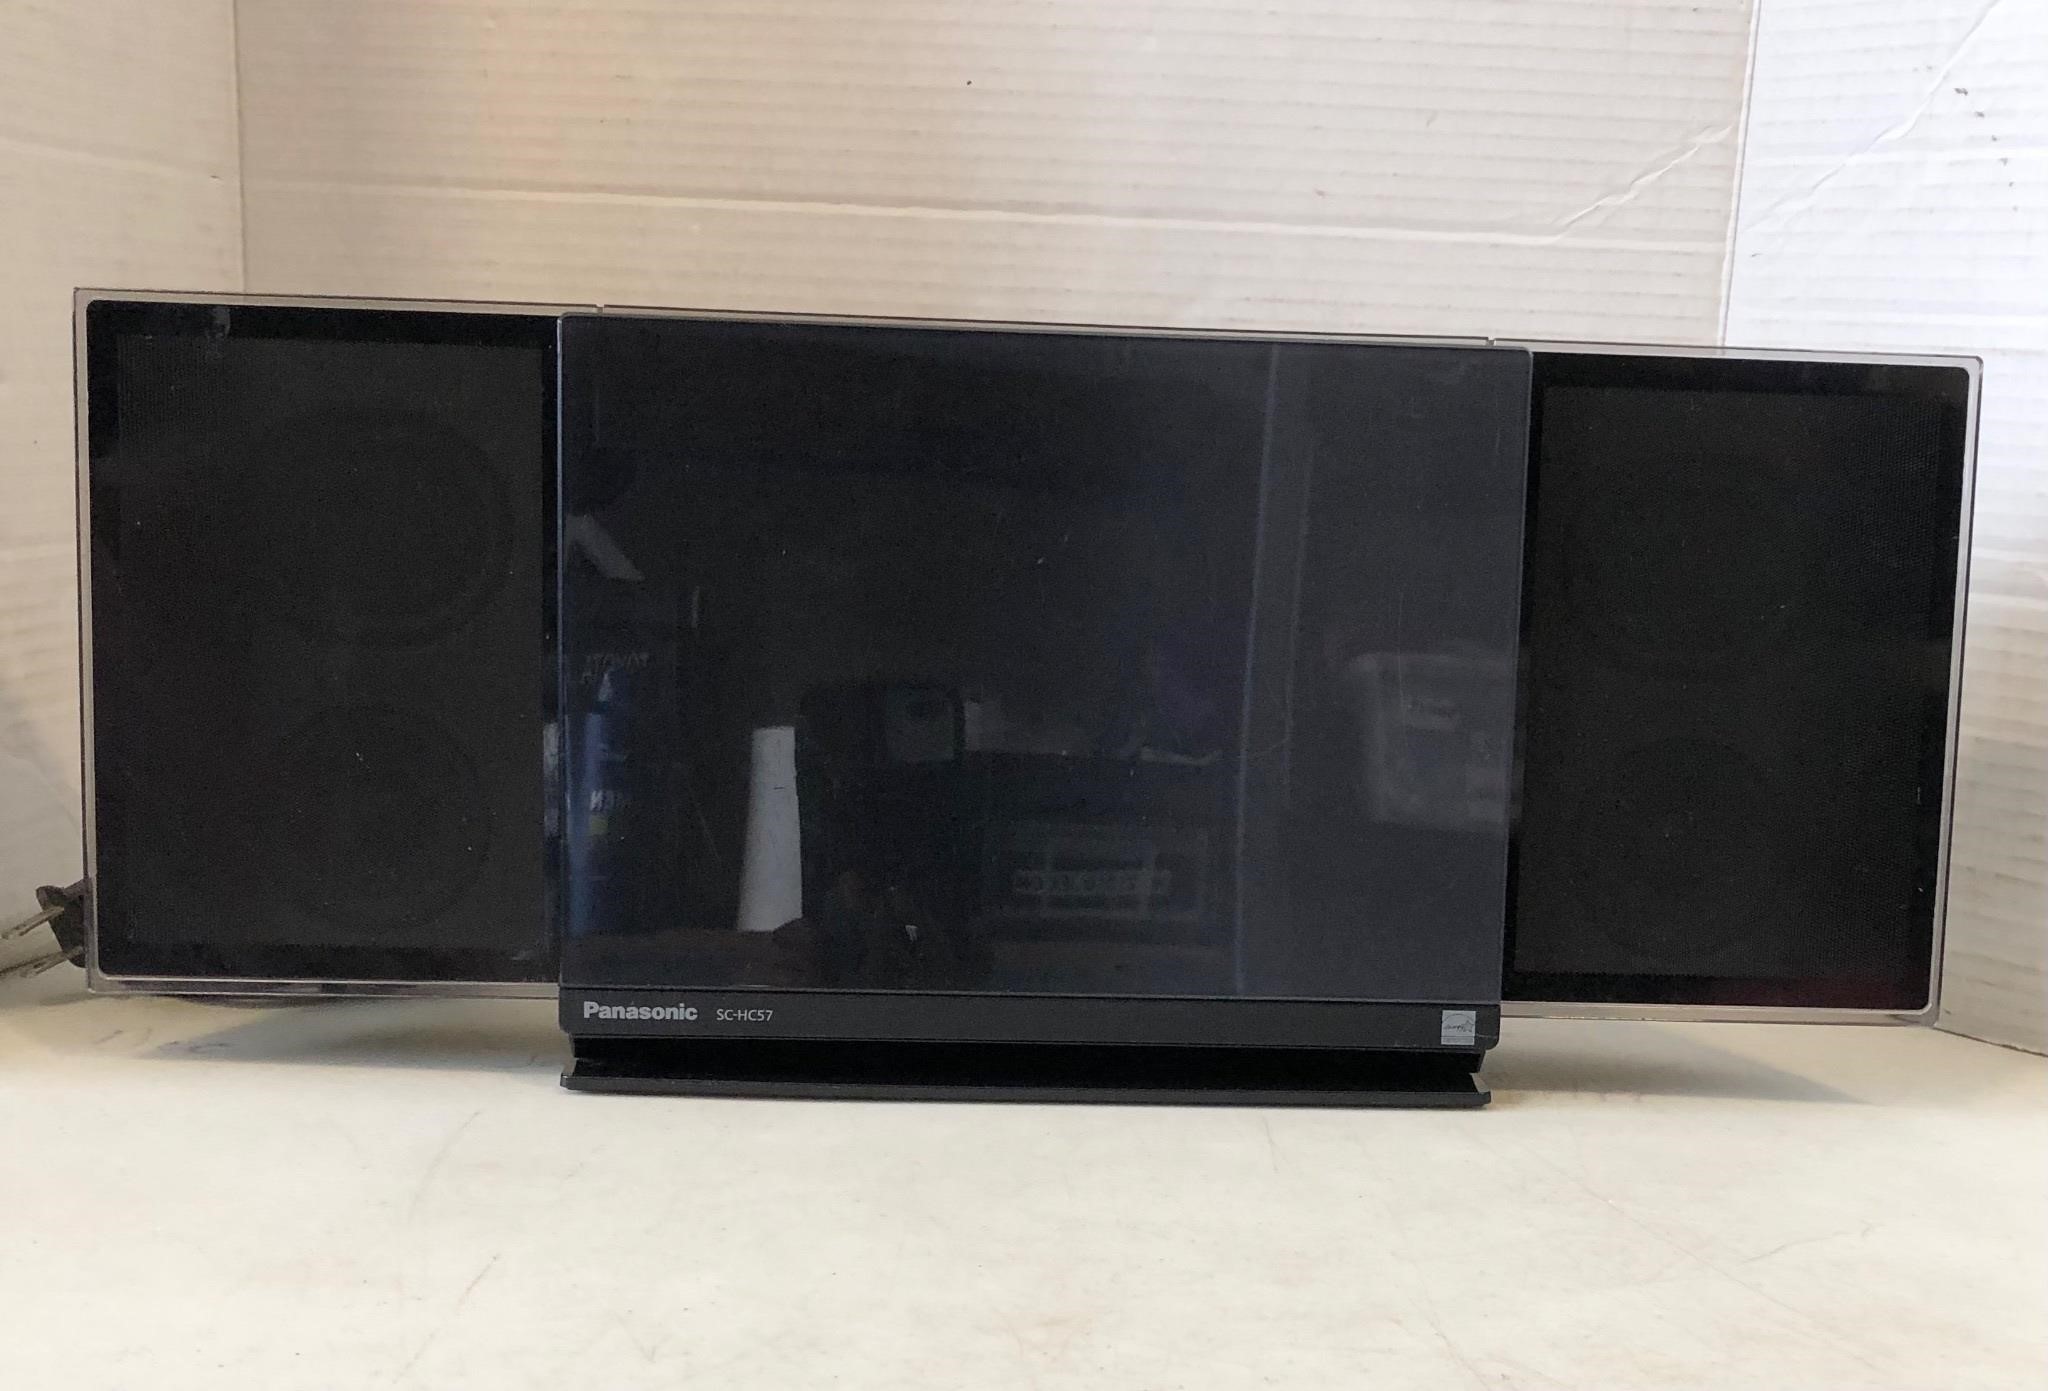 Panasonic SCHC57 Compact Stereo System